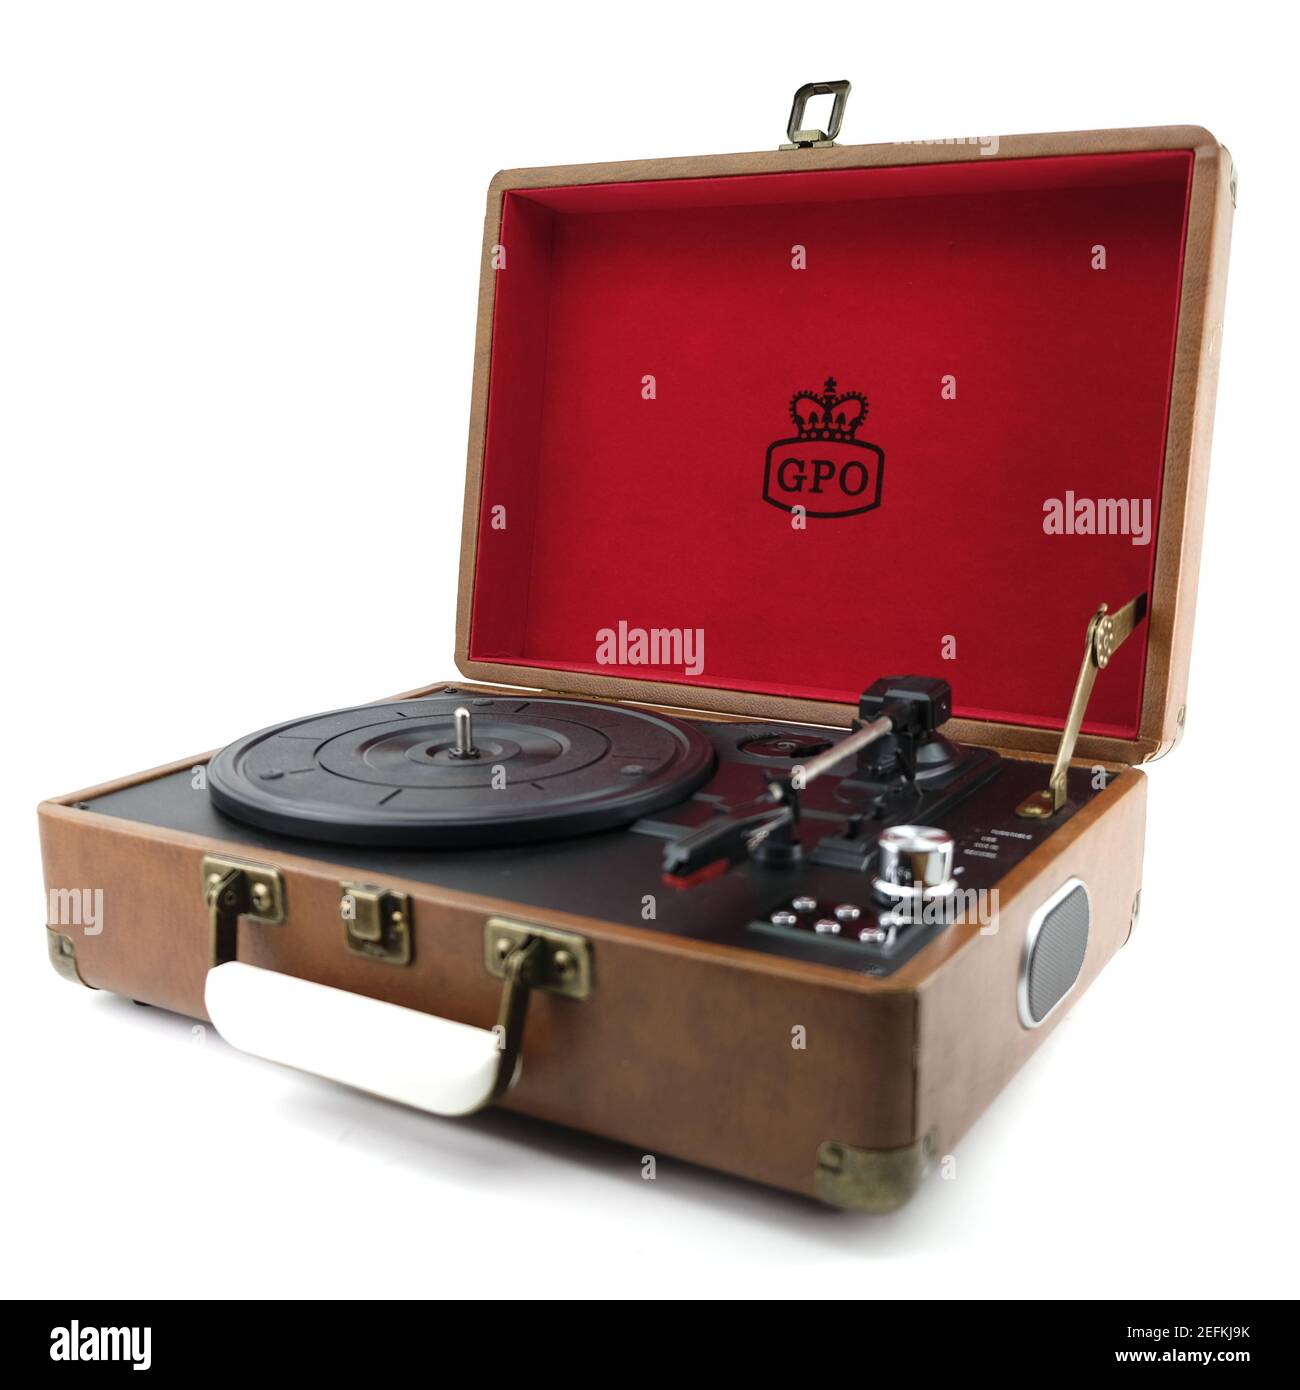 Retro design GPO Attache Briefcase Style Record Player 3-Speed Portable Vinyl Turntable with Built-In Speakers on white background Stock Photo